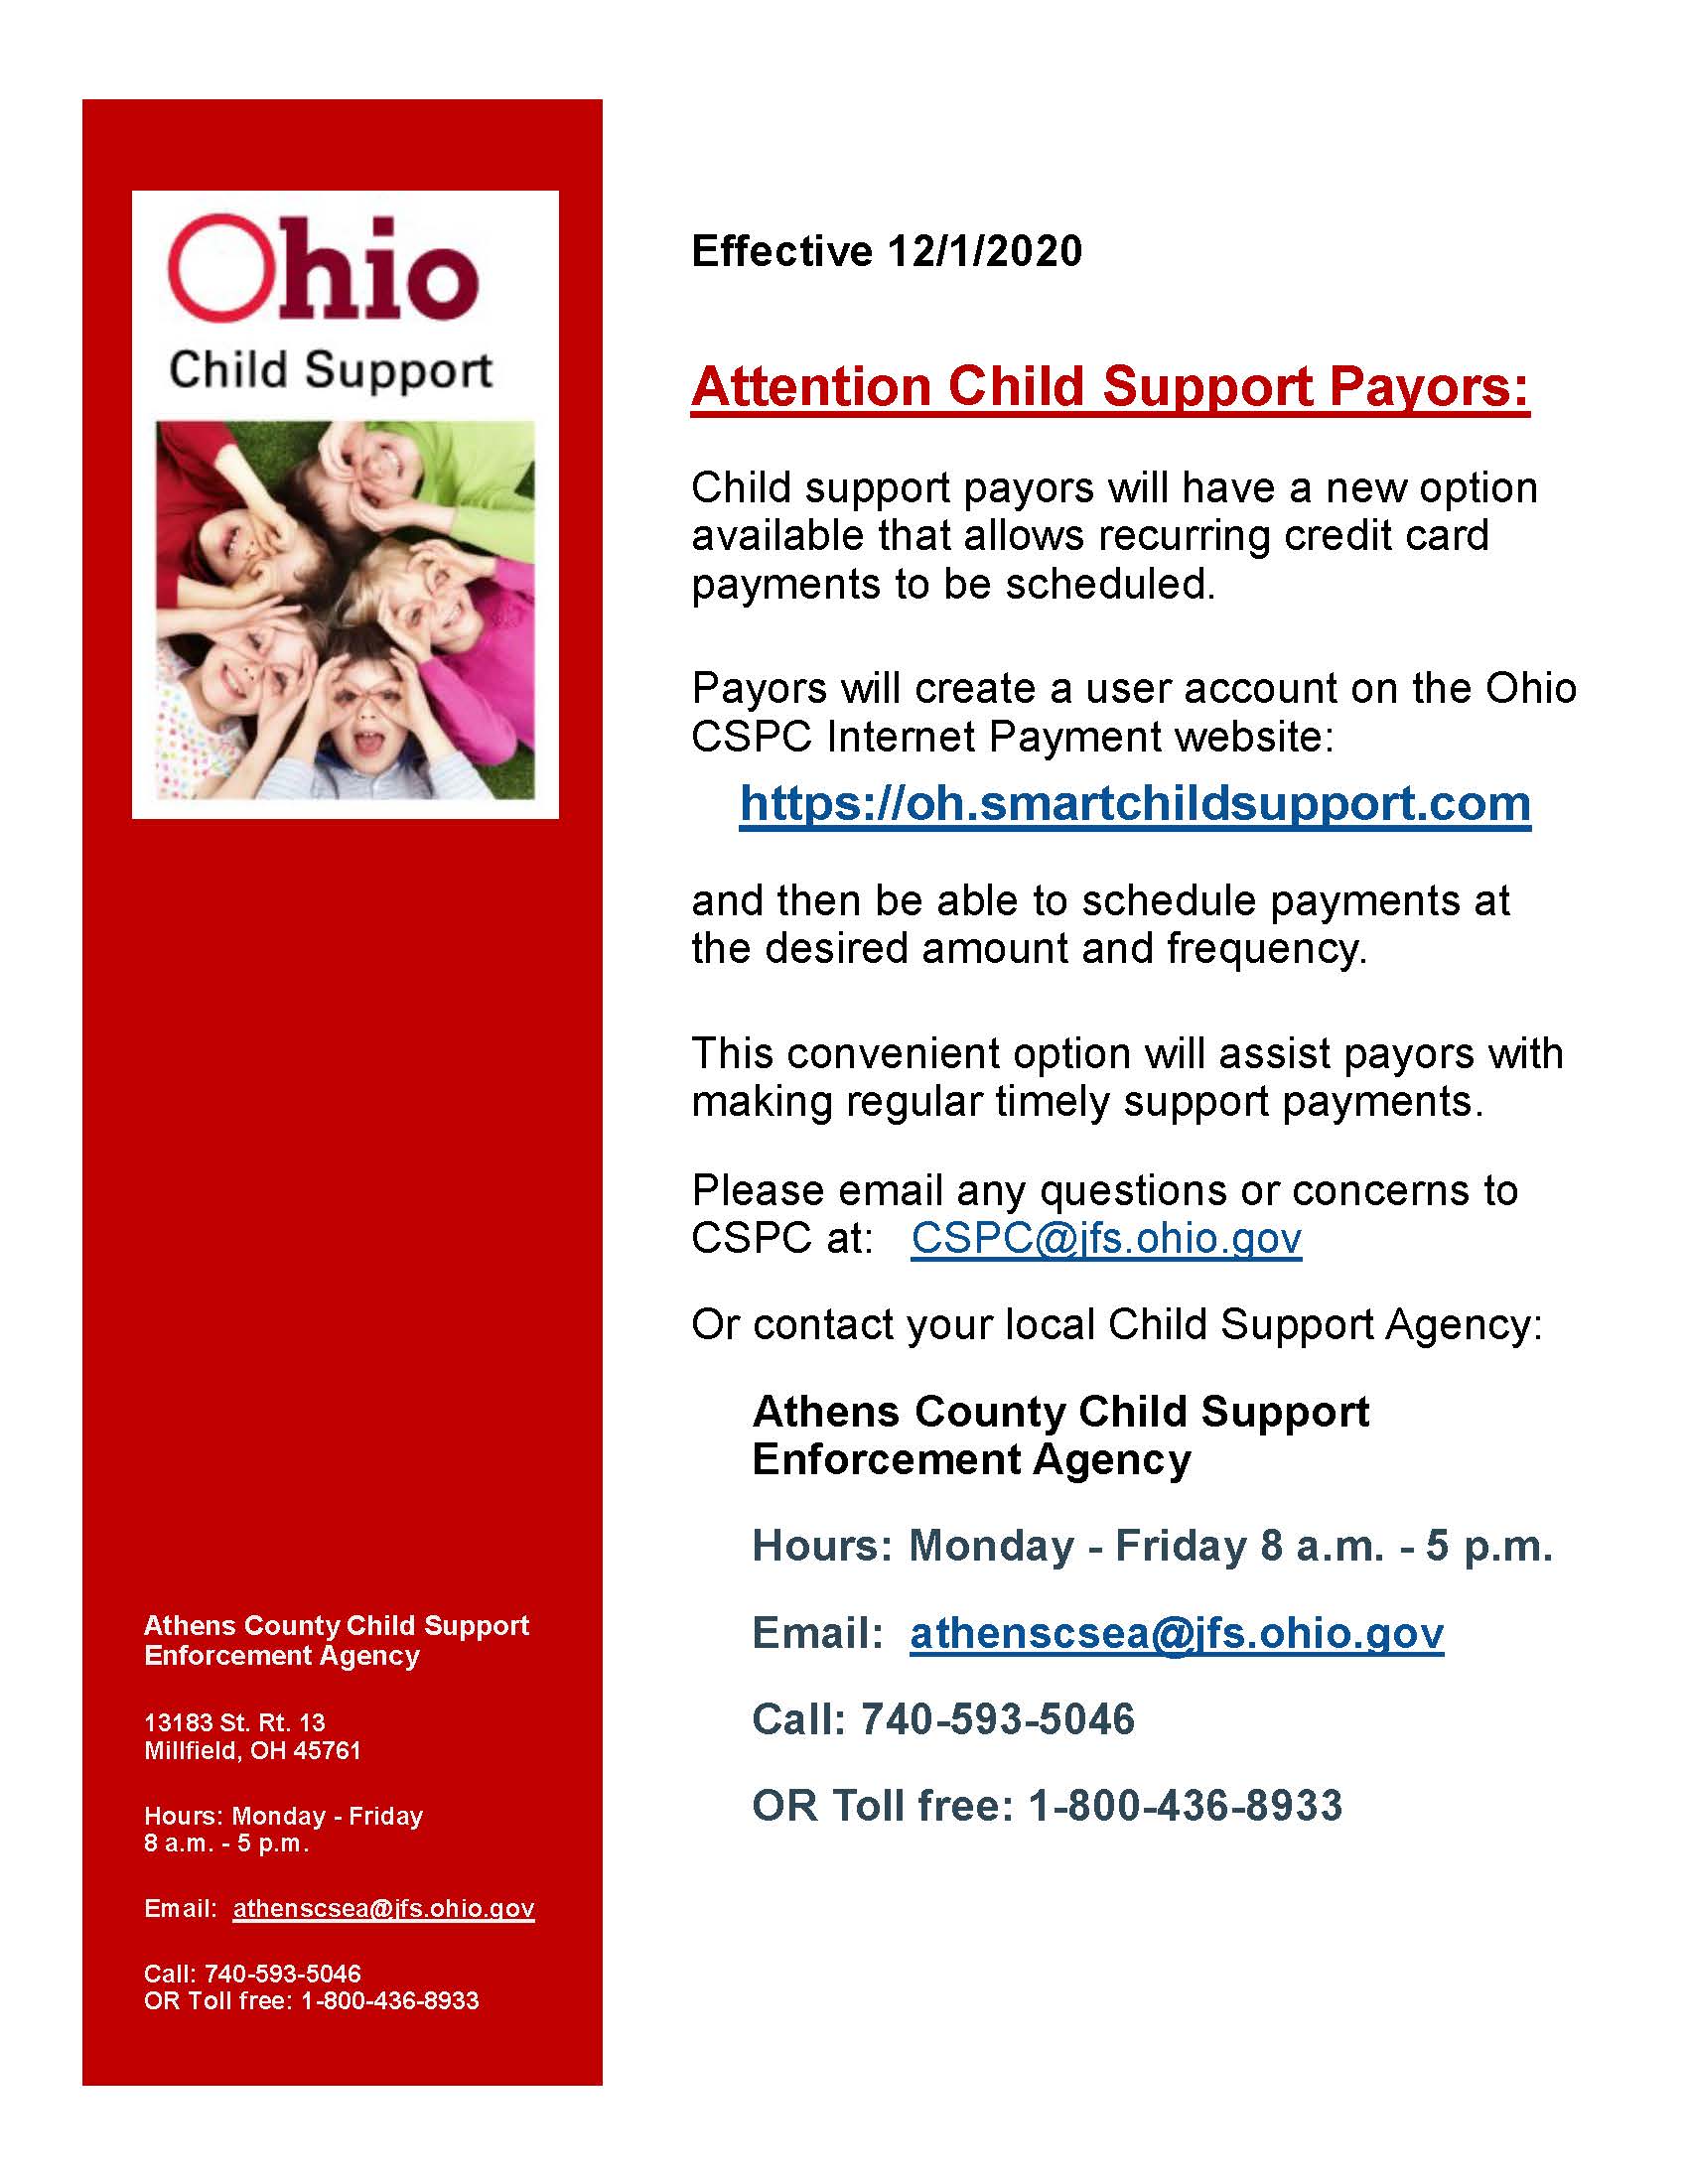 Child Support Payors.new payment option 12-1-2020